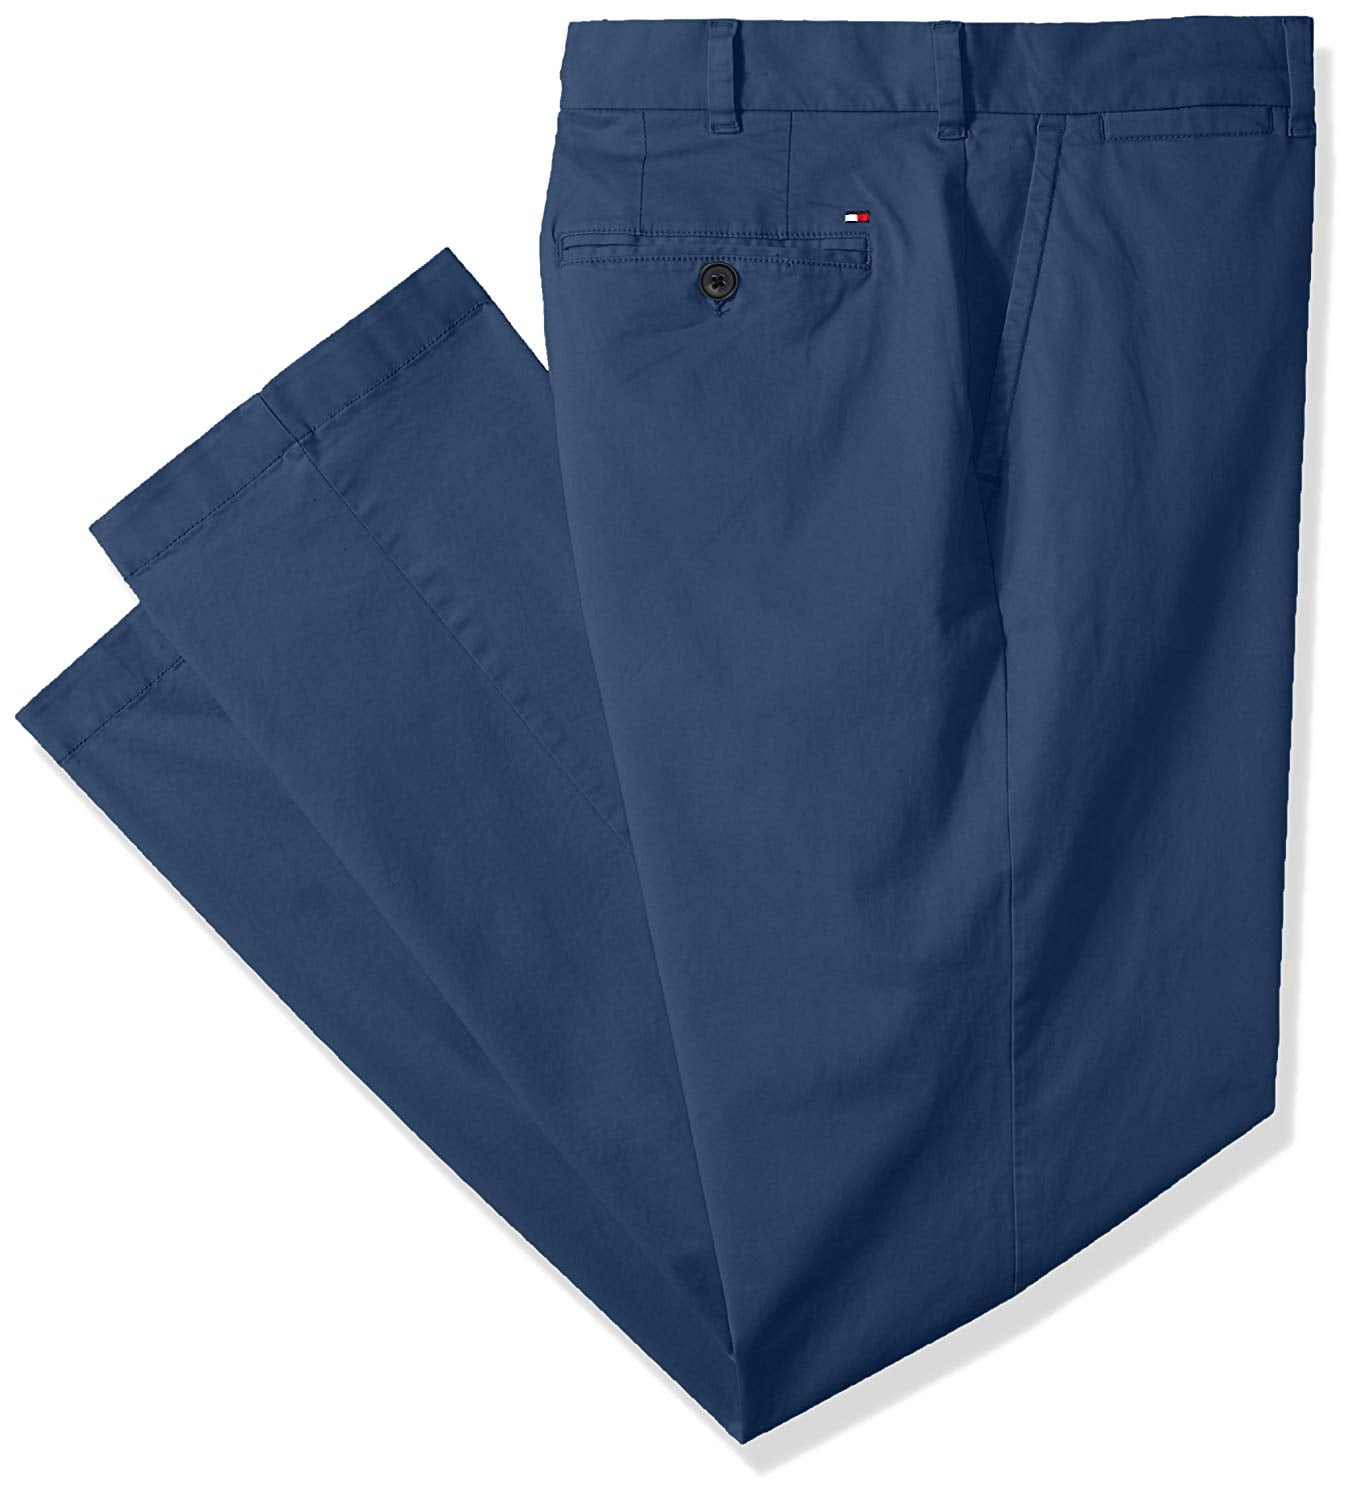 Tommy Hilfiger Men's Big and Tall 